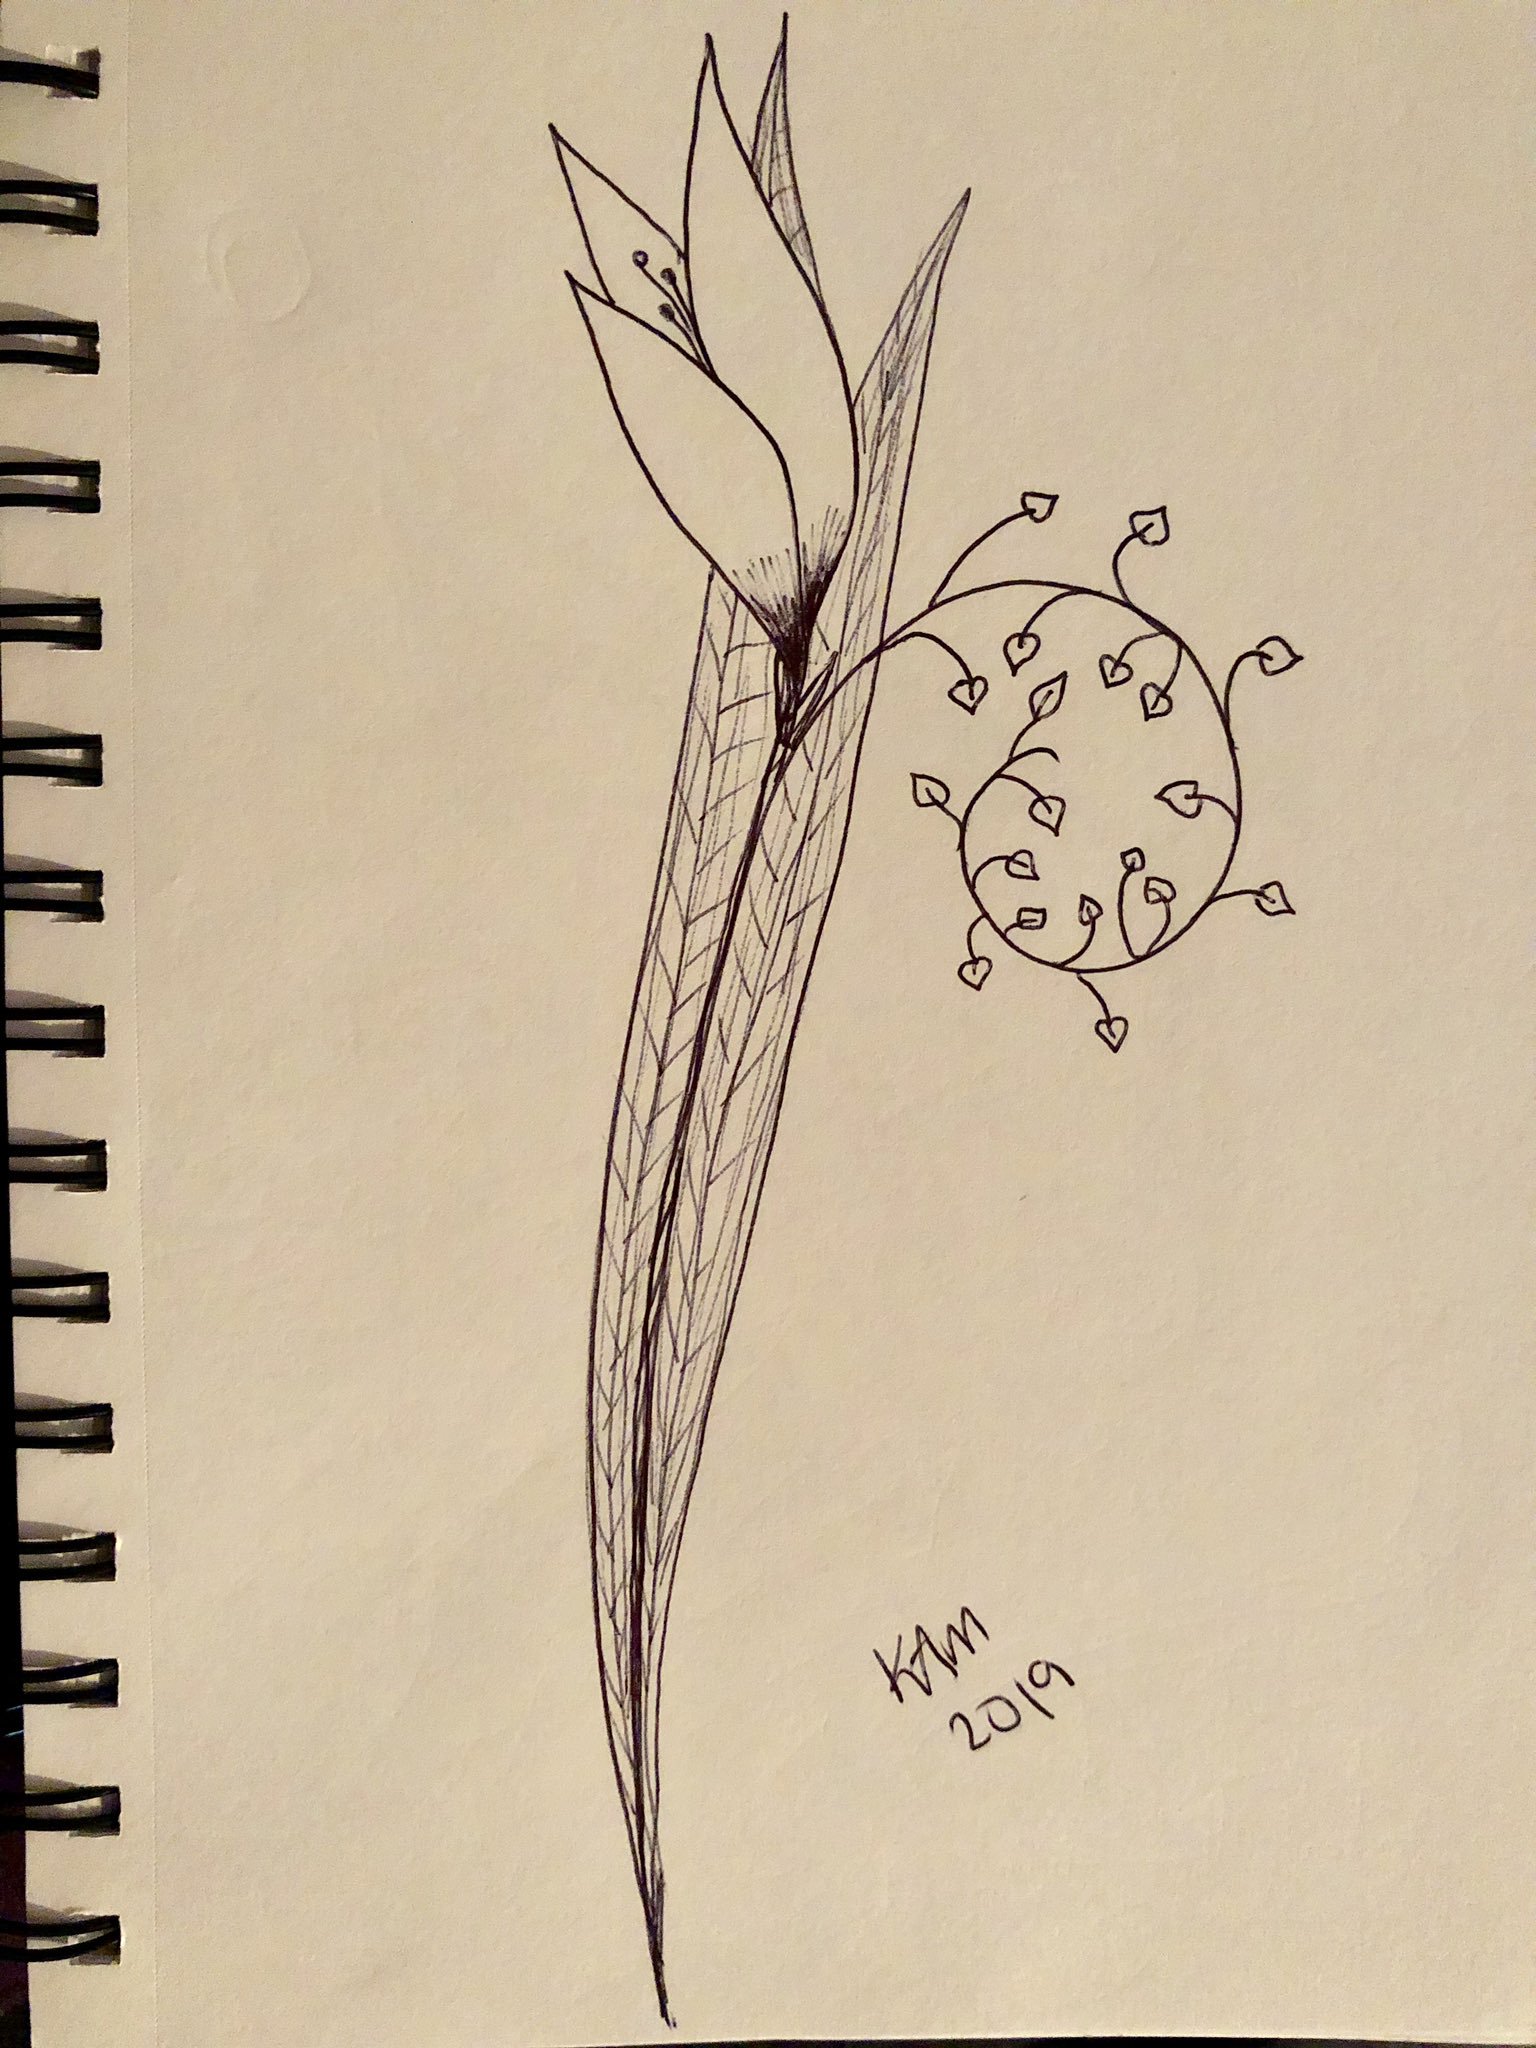 a drawing made in black ballpoint pen of a large flower poking out of two large leaves with a smaller vine of leaves growing out of its side in a spiral. signed KAM 2019